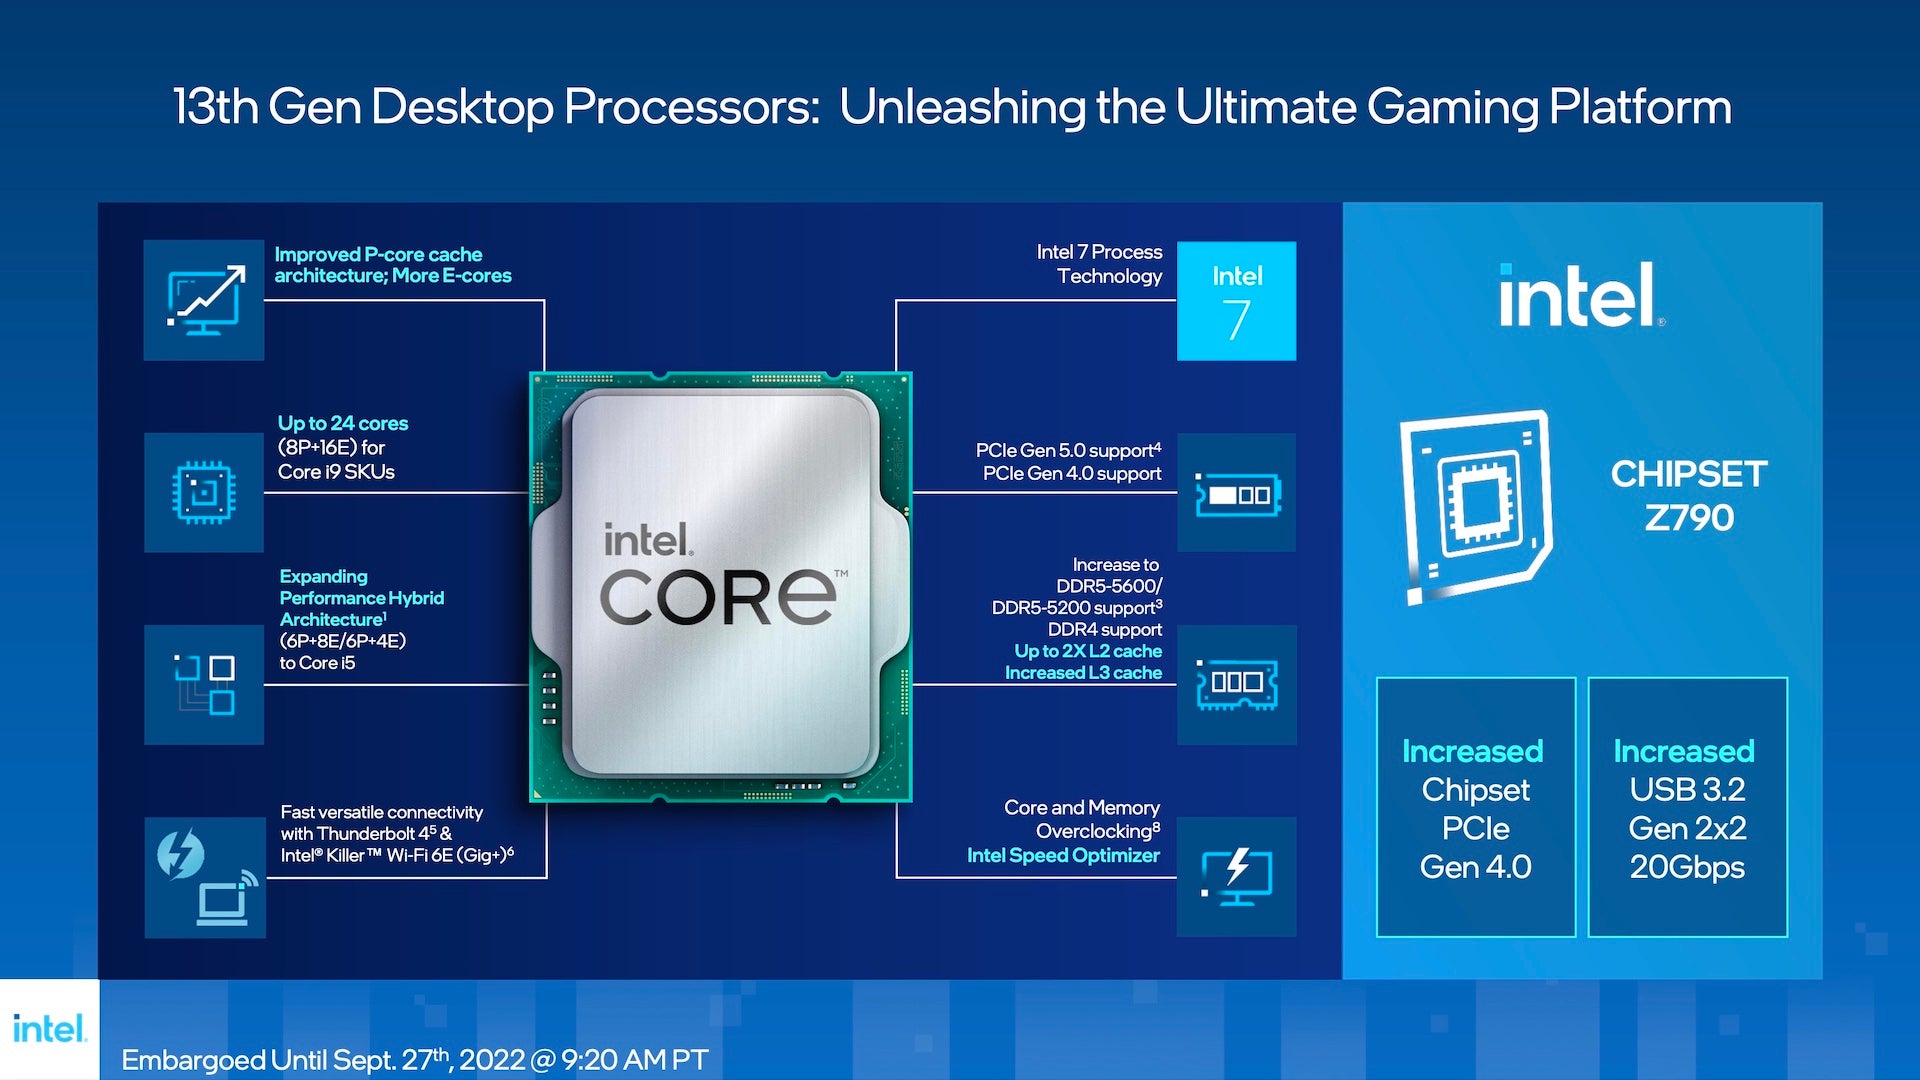 Reasons why you should upgrade to Intel’s 13th Gen CPUs